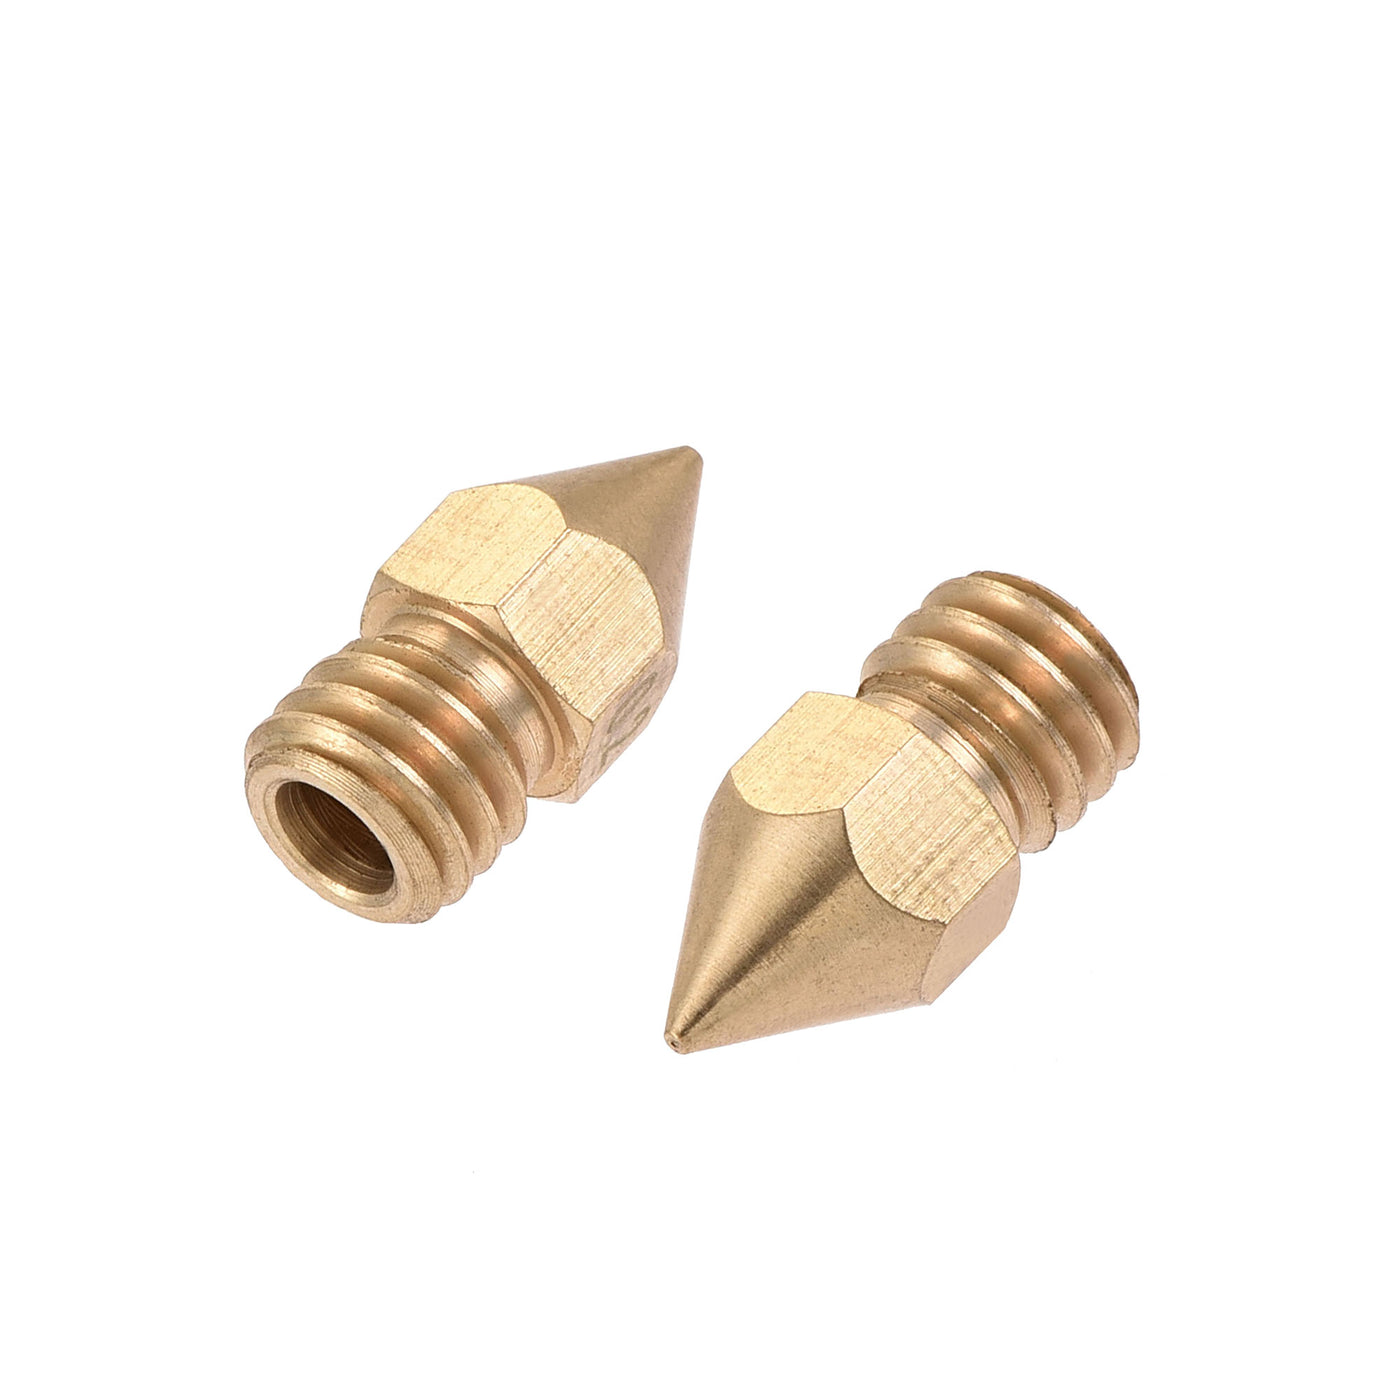 uxcell Uxcell 0.2mm 3D Printer Nozzle, 30pcs M6 Thread for MK8 3mm Extruder Print, Brass